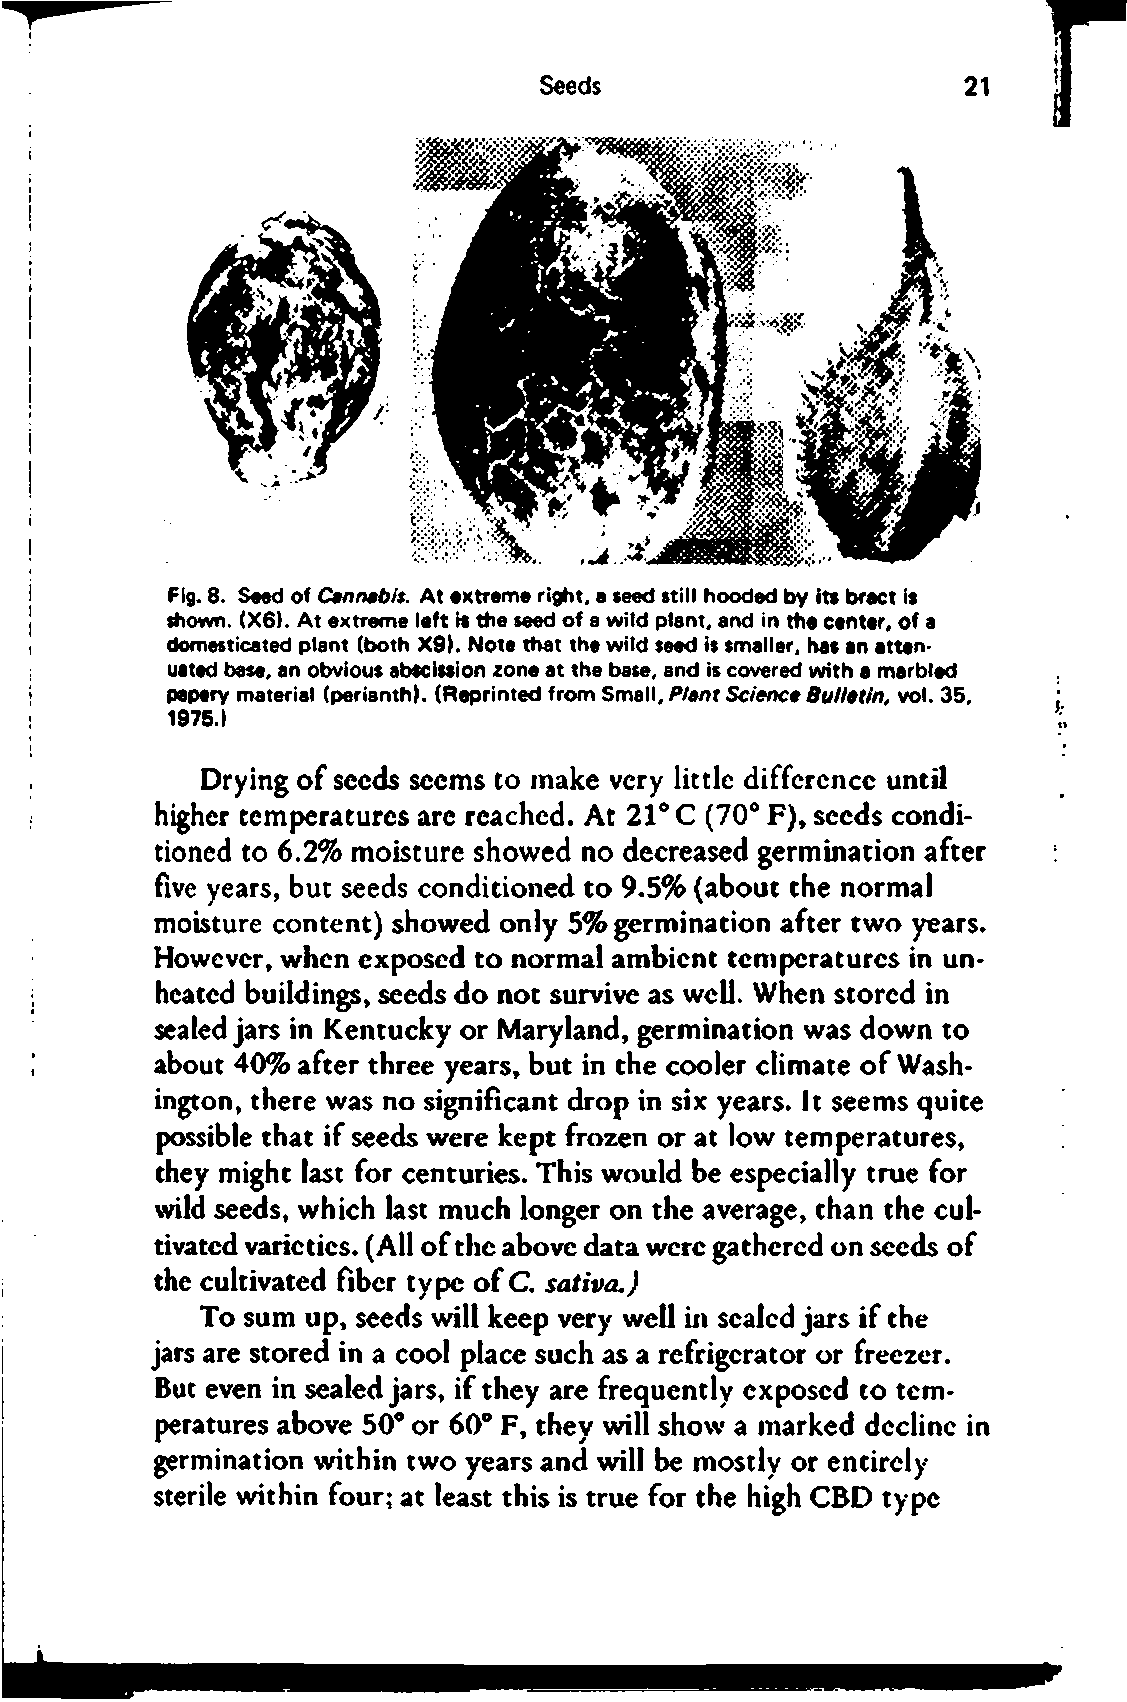 Fig. 8. S ed of Ctftntbit. At xtrome right, a seed still hooded by its bract is shown. (X6). At extreme left h the seed of a wild plant, and in the center, of a domesticated plant (both X9K Note that the wild seed is smaller, has an attenuated base, an obvious abscission zone at the base, and is covered with a marbled pepery material (perianth (Reprinted from Small, P/snt Sc/ence BuUbtin, vol. 35, 1975.1...